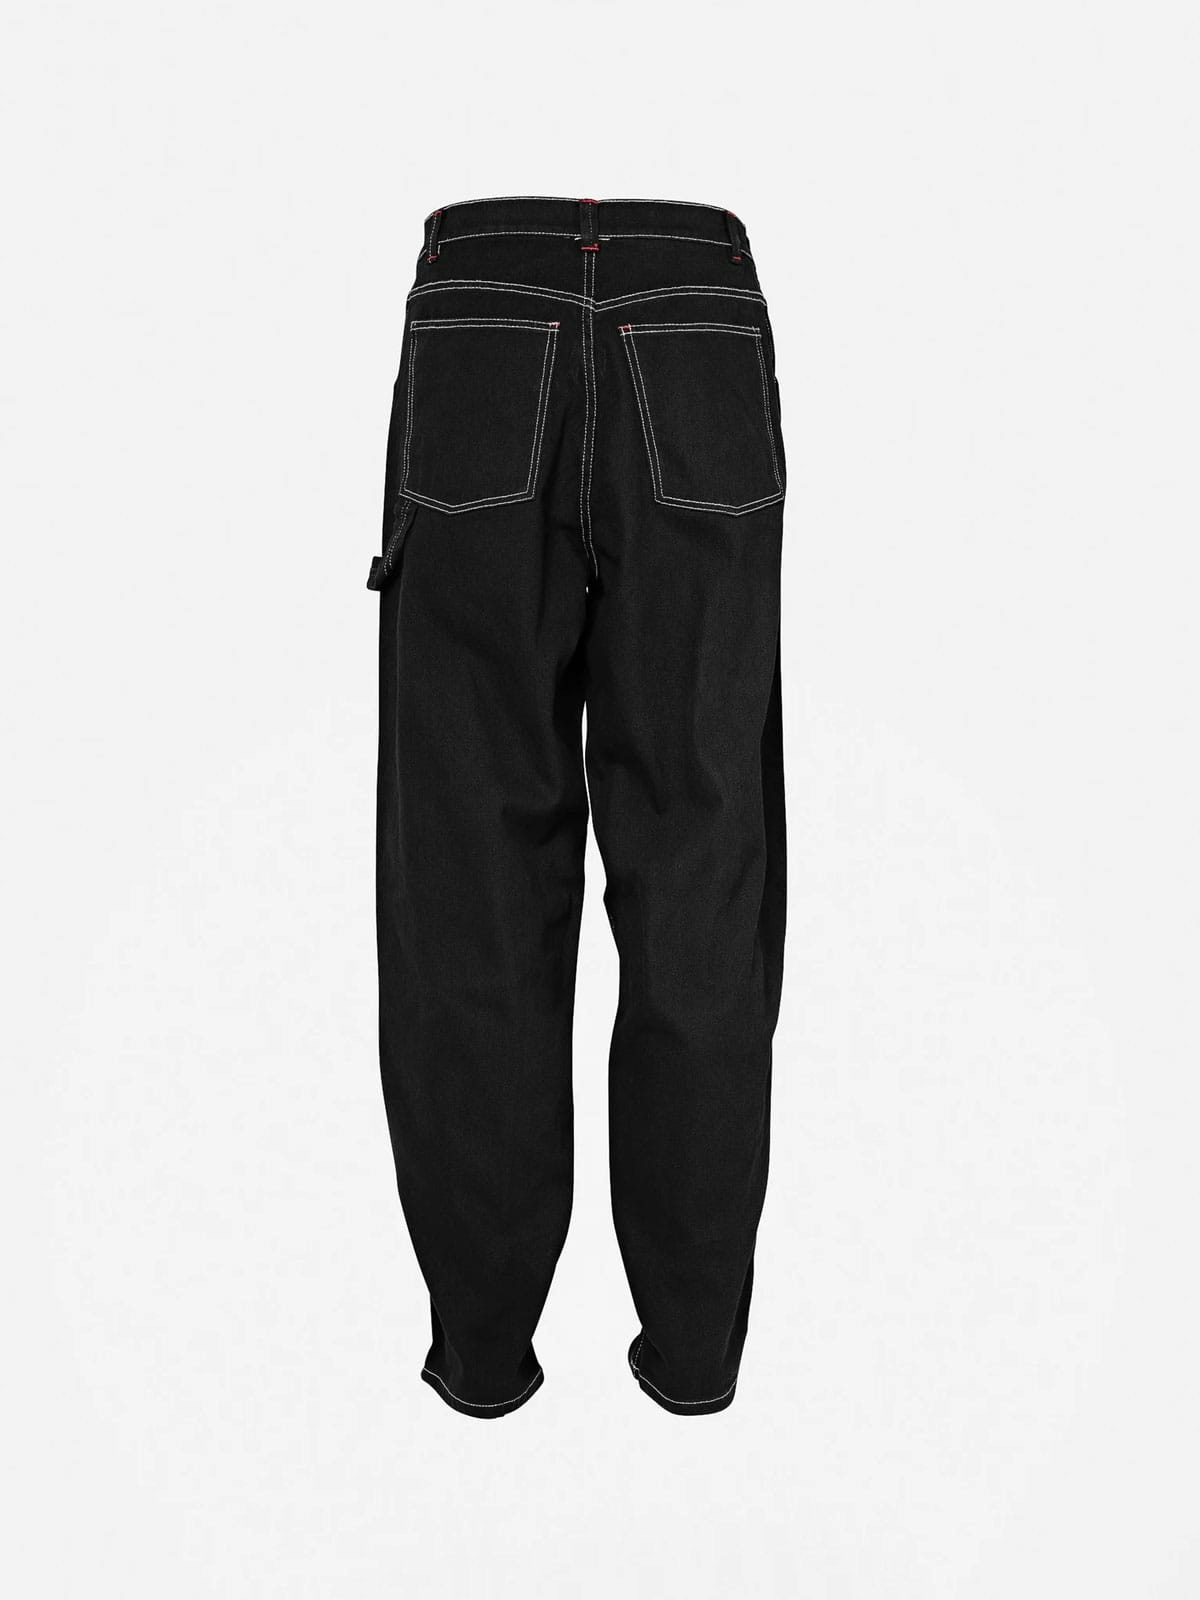 Street Style Pacos Tacos Baggy Jeans Black 2